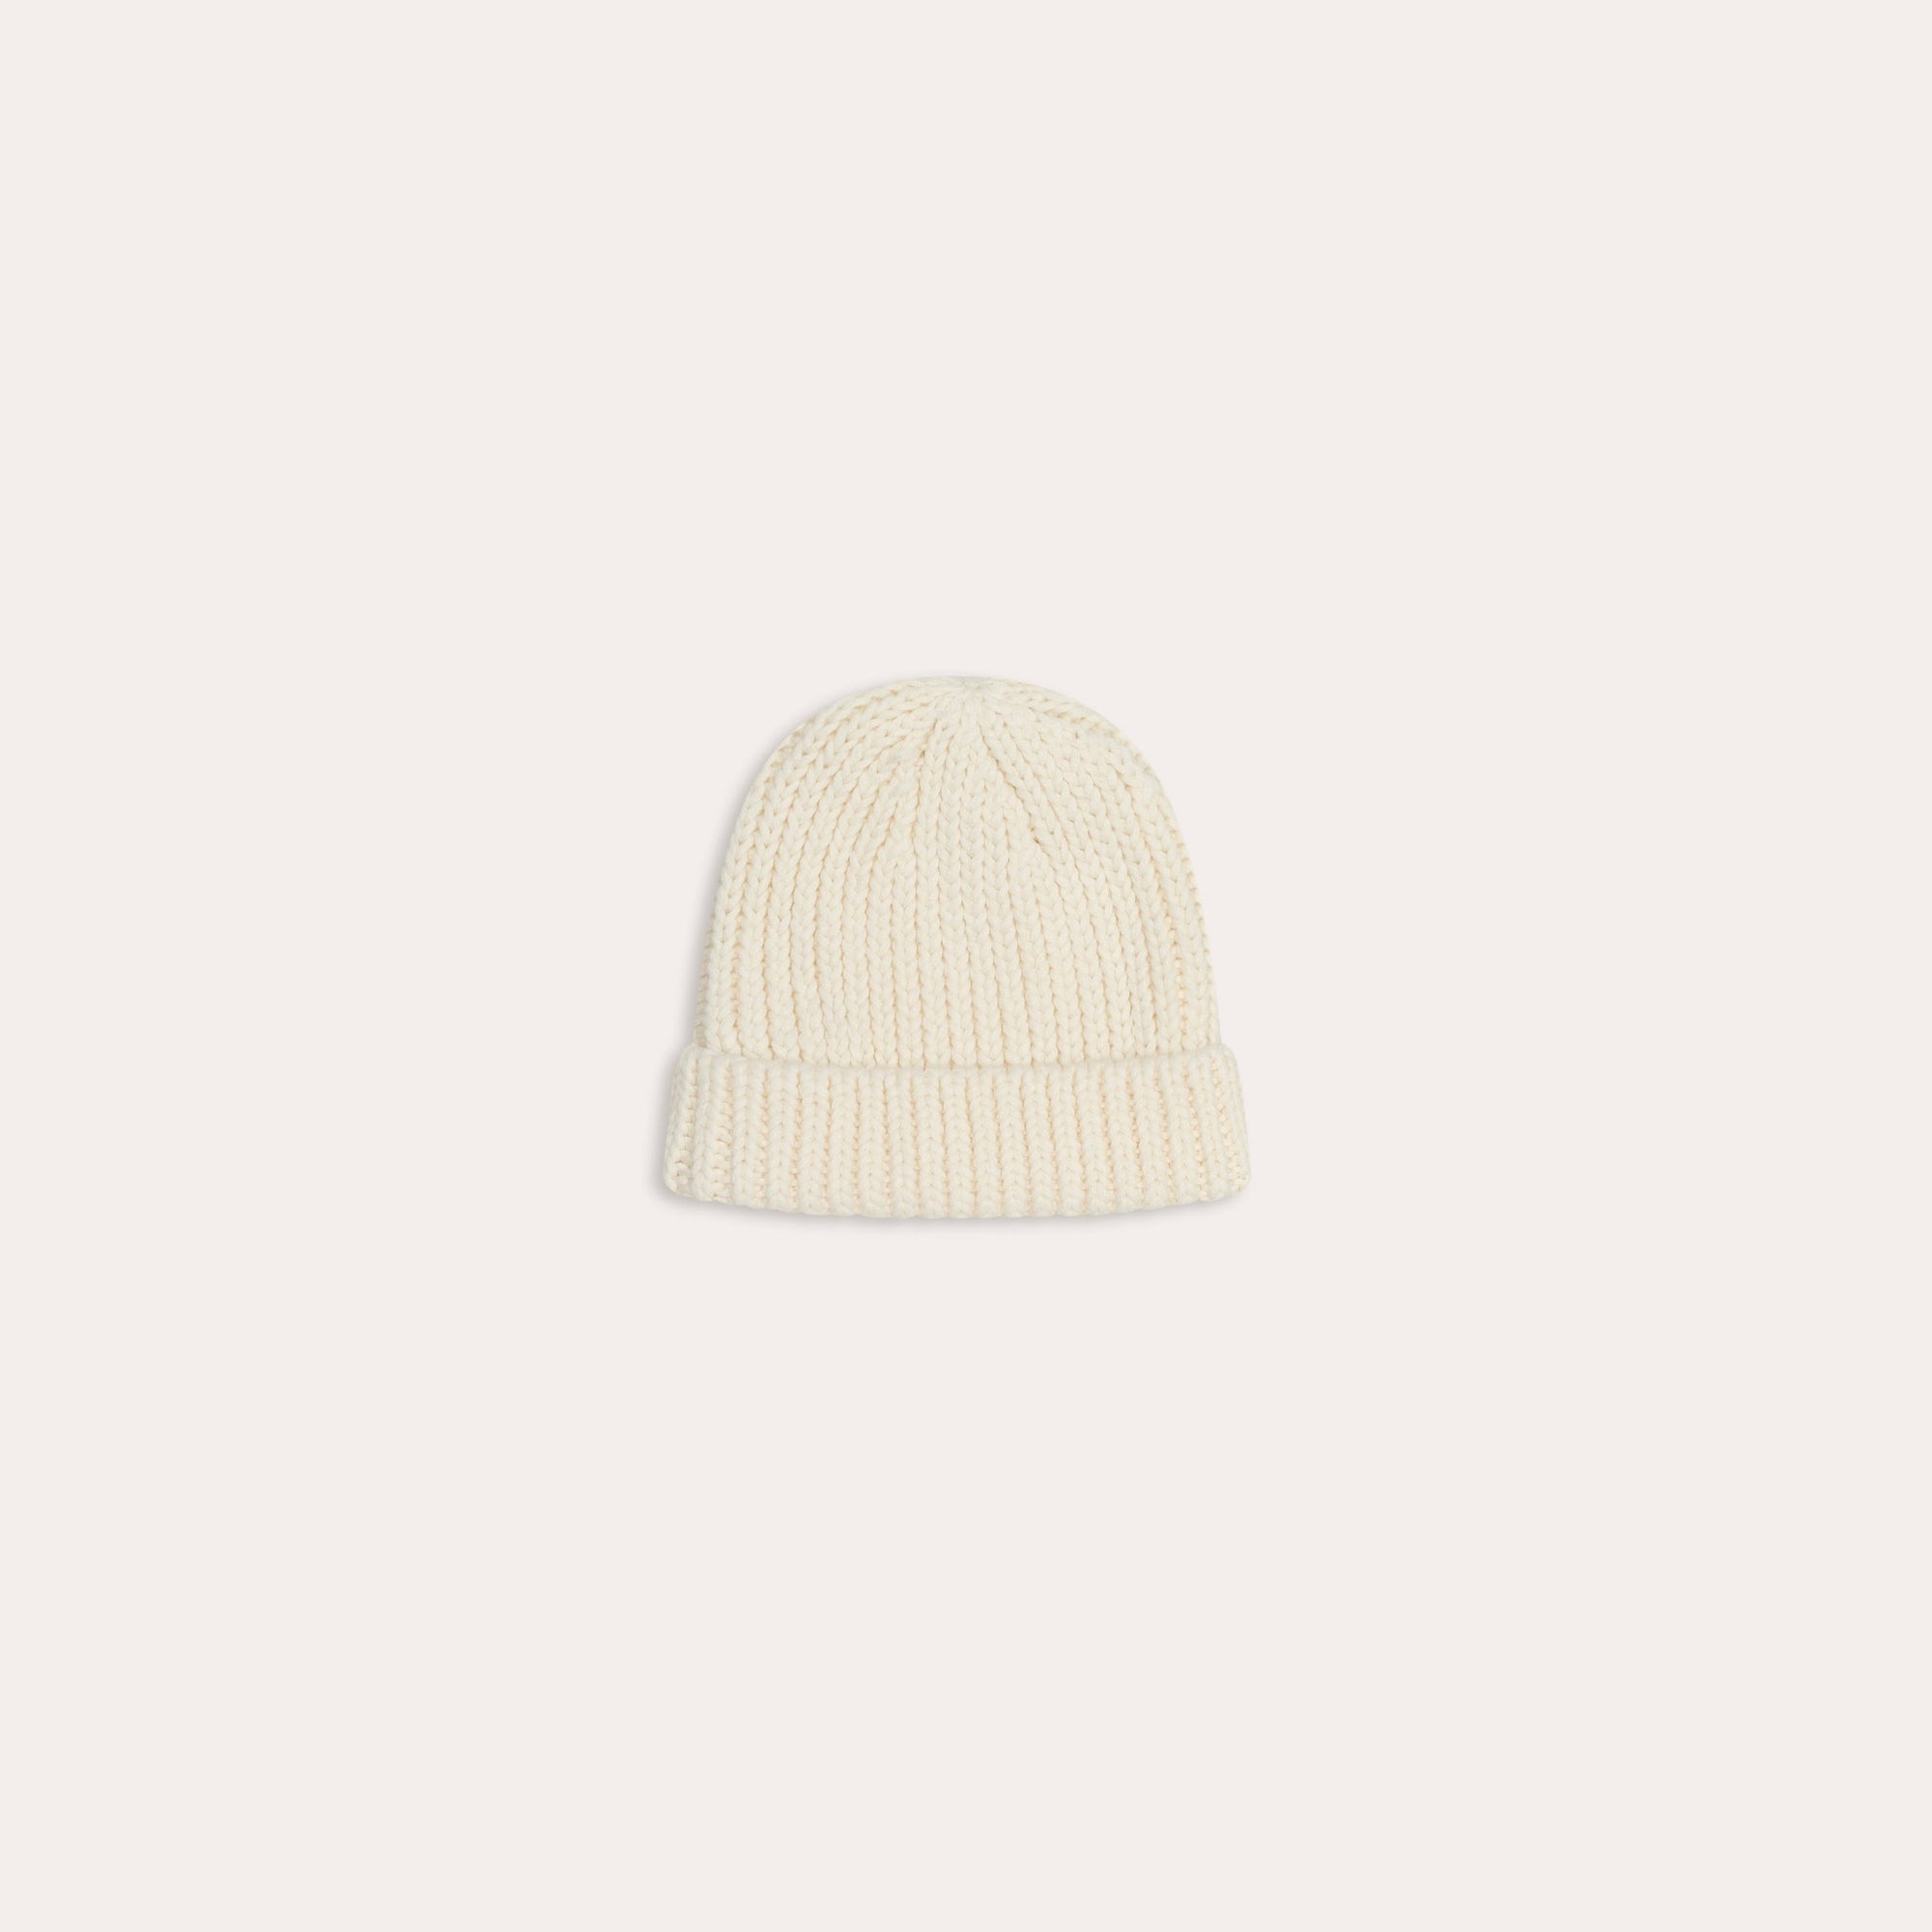 An illoura knitted alba beanie in vanilla, perfect for newborns, on a white background. [Brand Name: Illoura the Label]